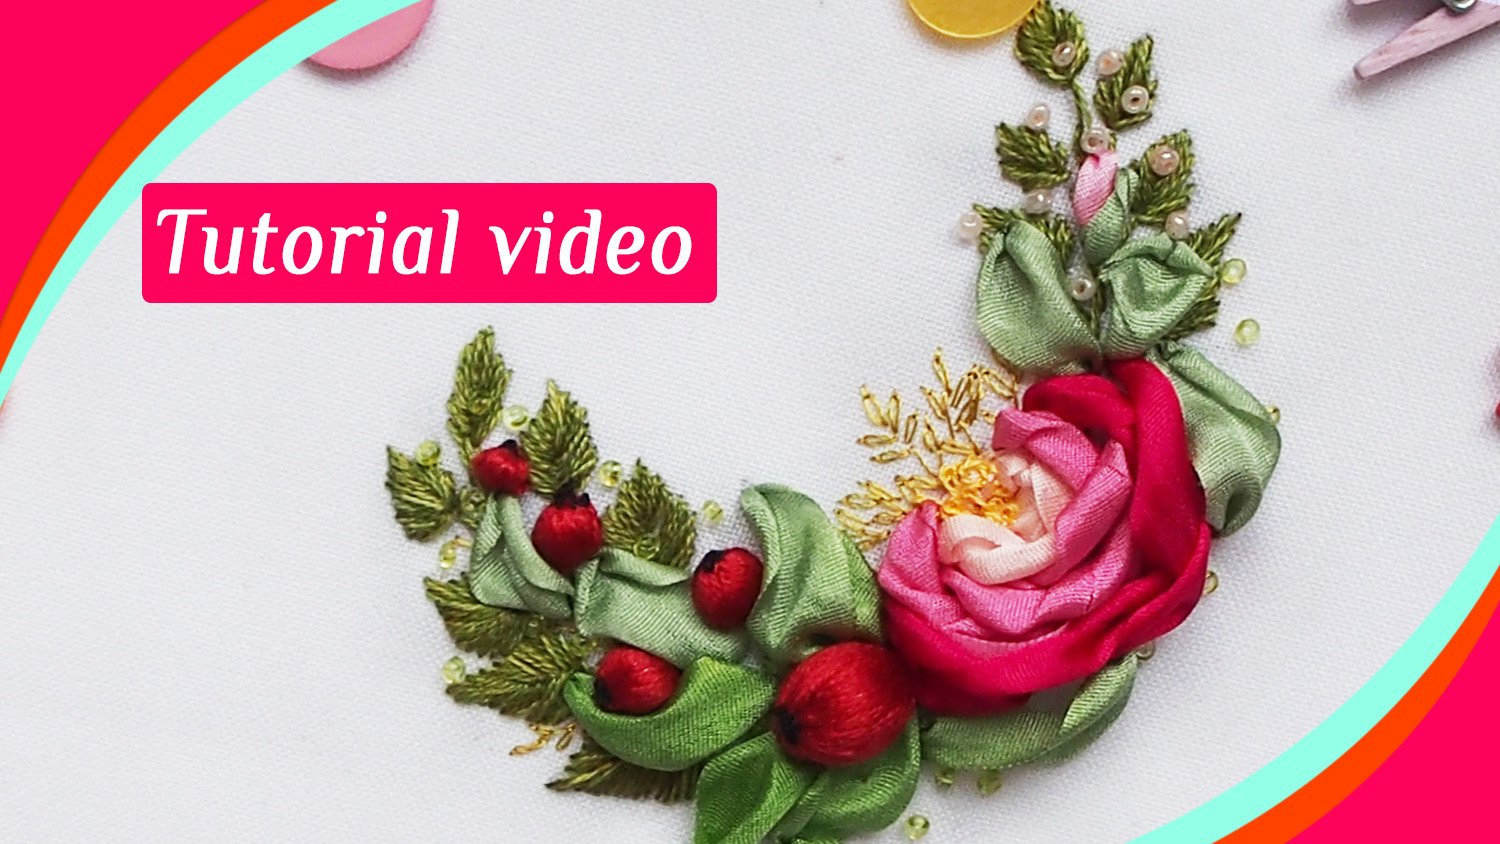 Ribbon Hand Embroidery Patterns Hand Embroidery Patterns Ribbon Tutorial Roses Embroidery Tutorial Video Guide For Embroidery Ribbons Roses Embroidery Pattern Roses How To